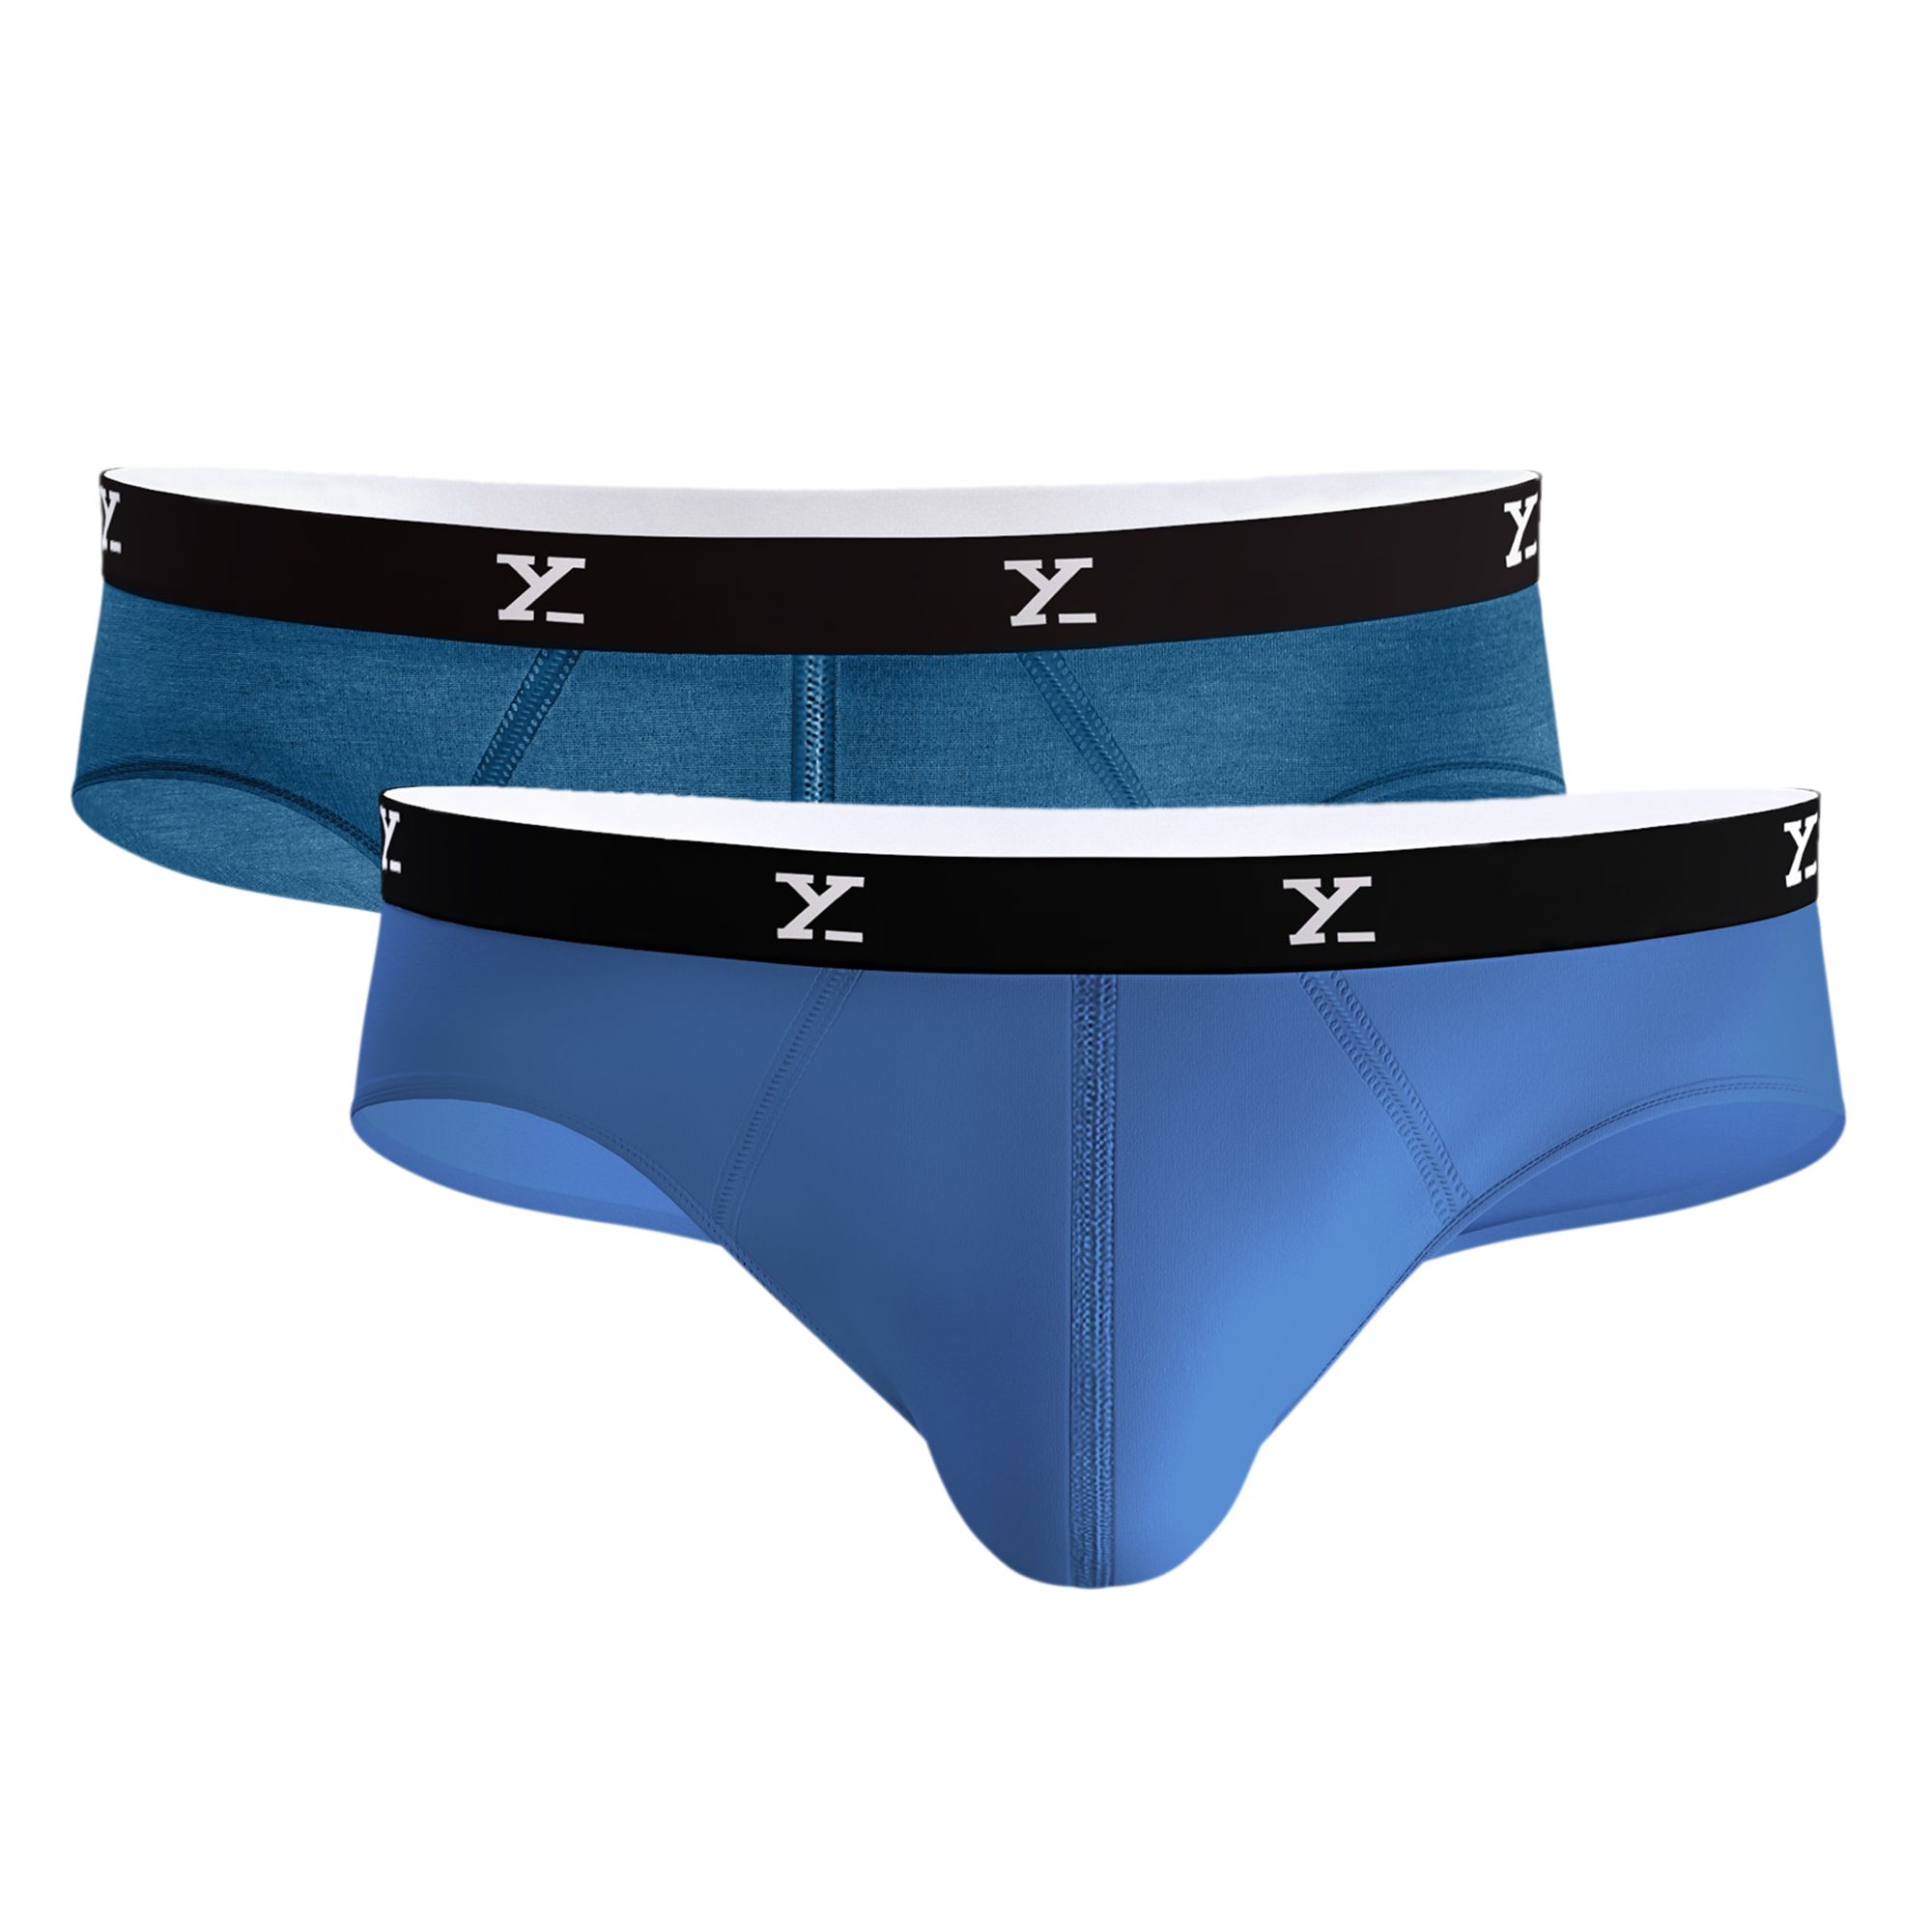 XYXX Blue Brief Pack of 2 - Buy XYXX Blue Brief Pack of 2 Online at Low ...